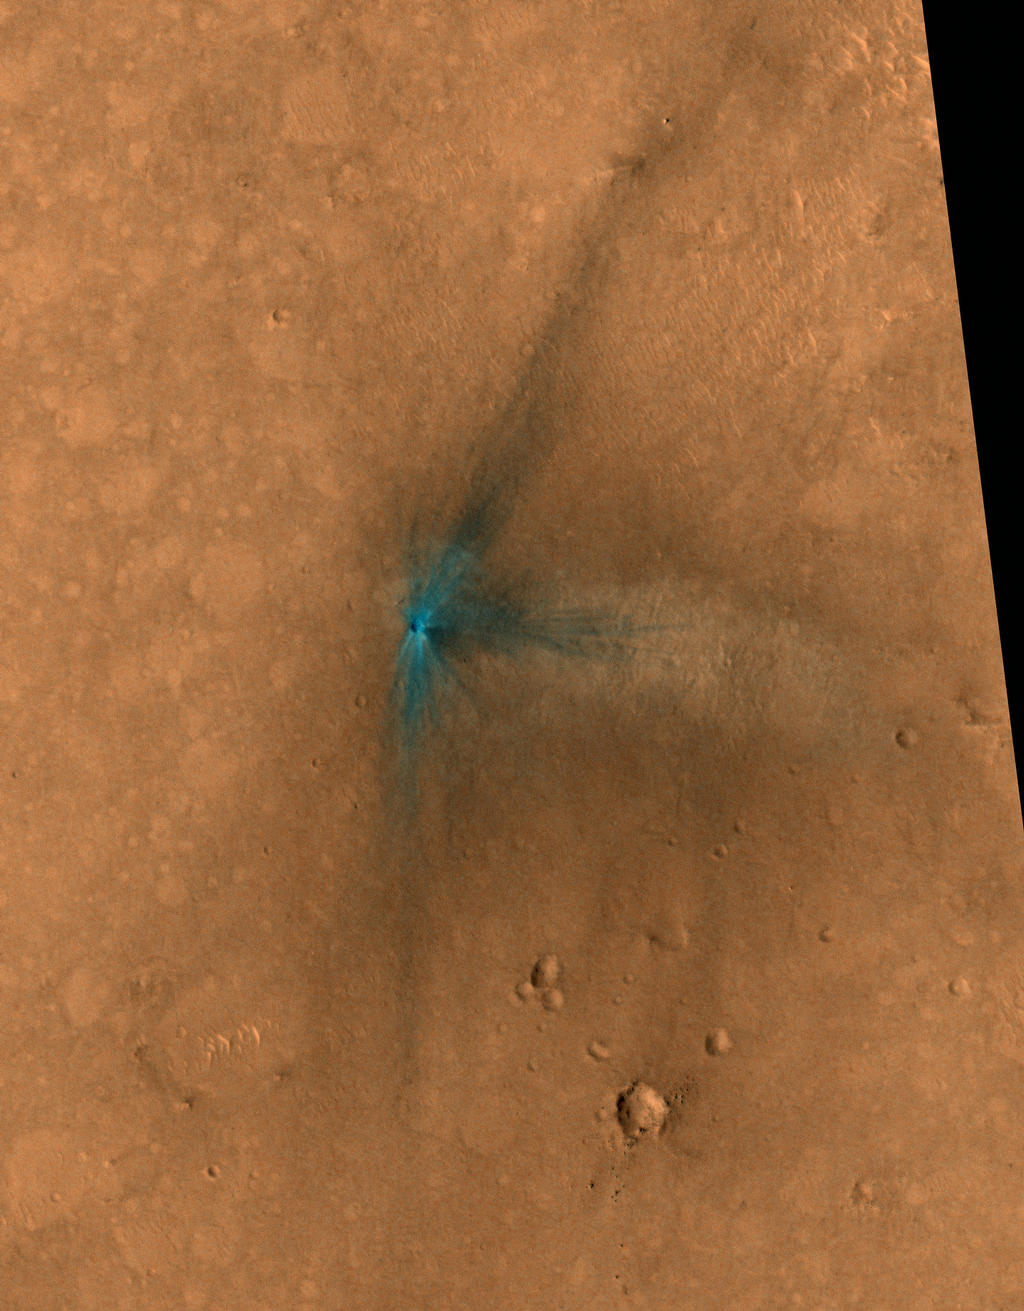 This image from the NASA Mars Reconnaissance Orbiter shows an impact scar on Mars made by pieces of the NASA Mars Science Laboratory spacecraft that the spacecraft shed just before entering the Martian atmosphere.